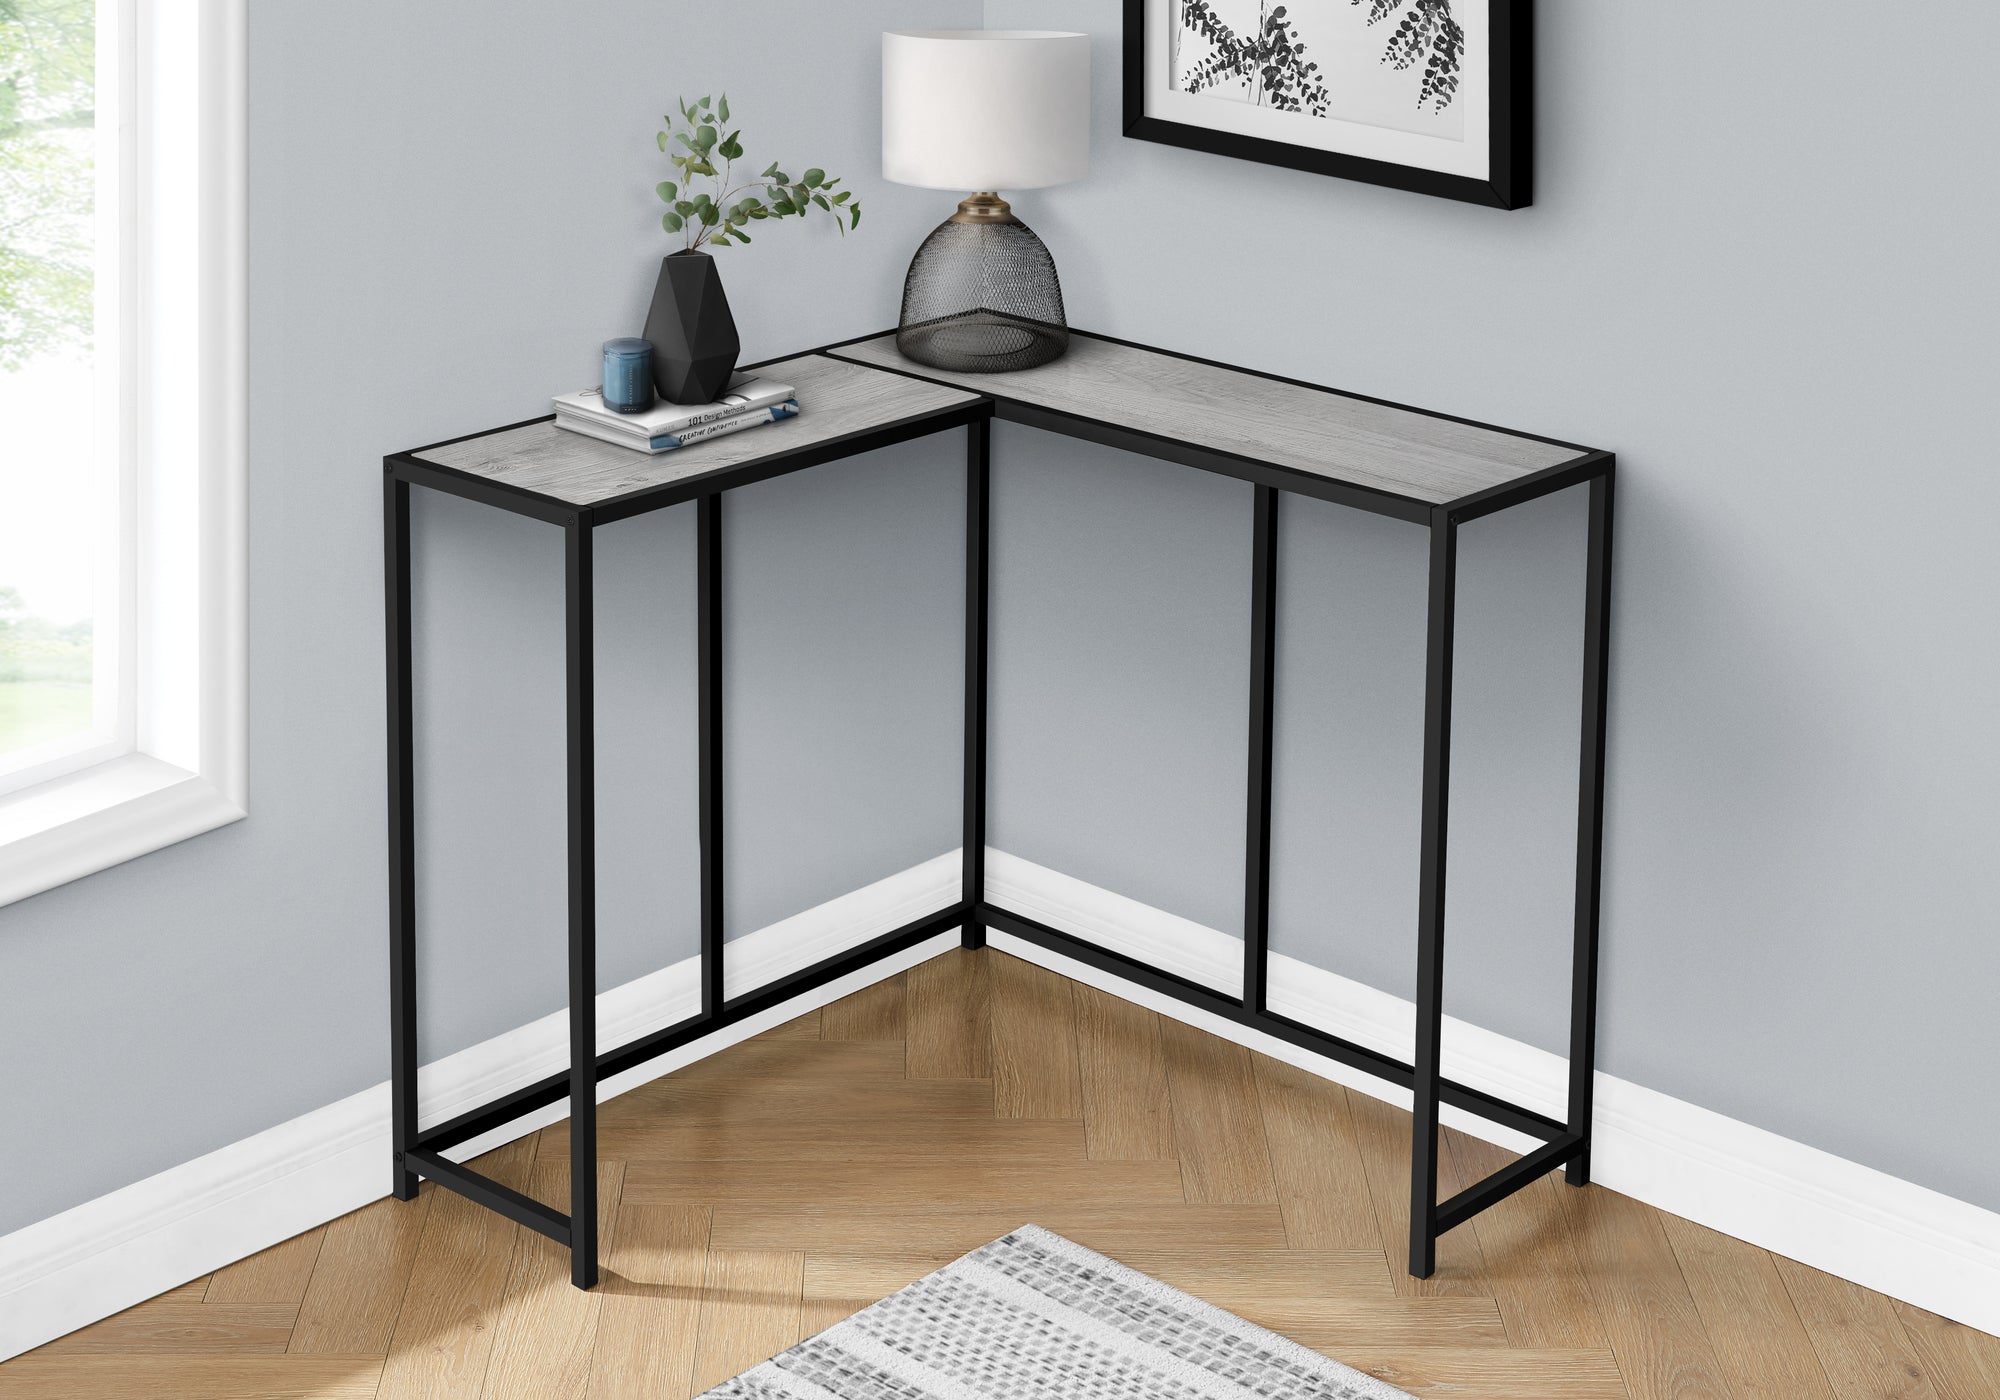 MN-292156    Accent Table, Console, Entryway, Narrow, Corner, Living Room, Bedroom, Metal Frame, Laminate, Grey, Black, Contemporary, Modern